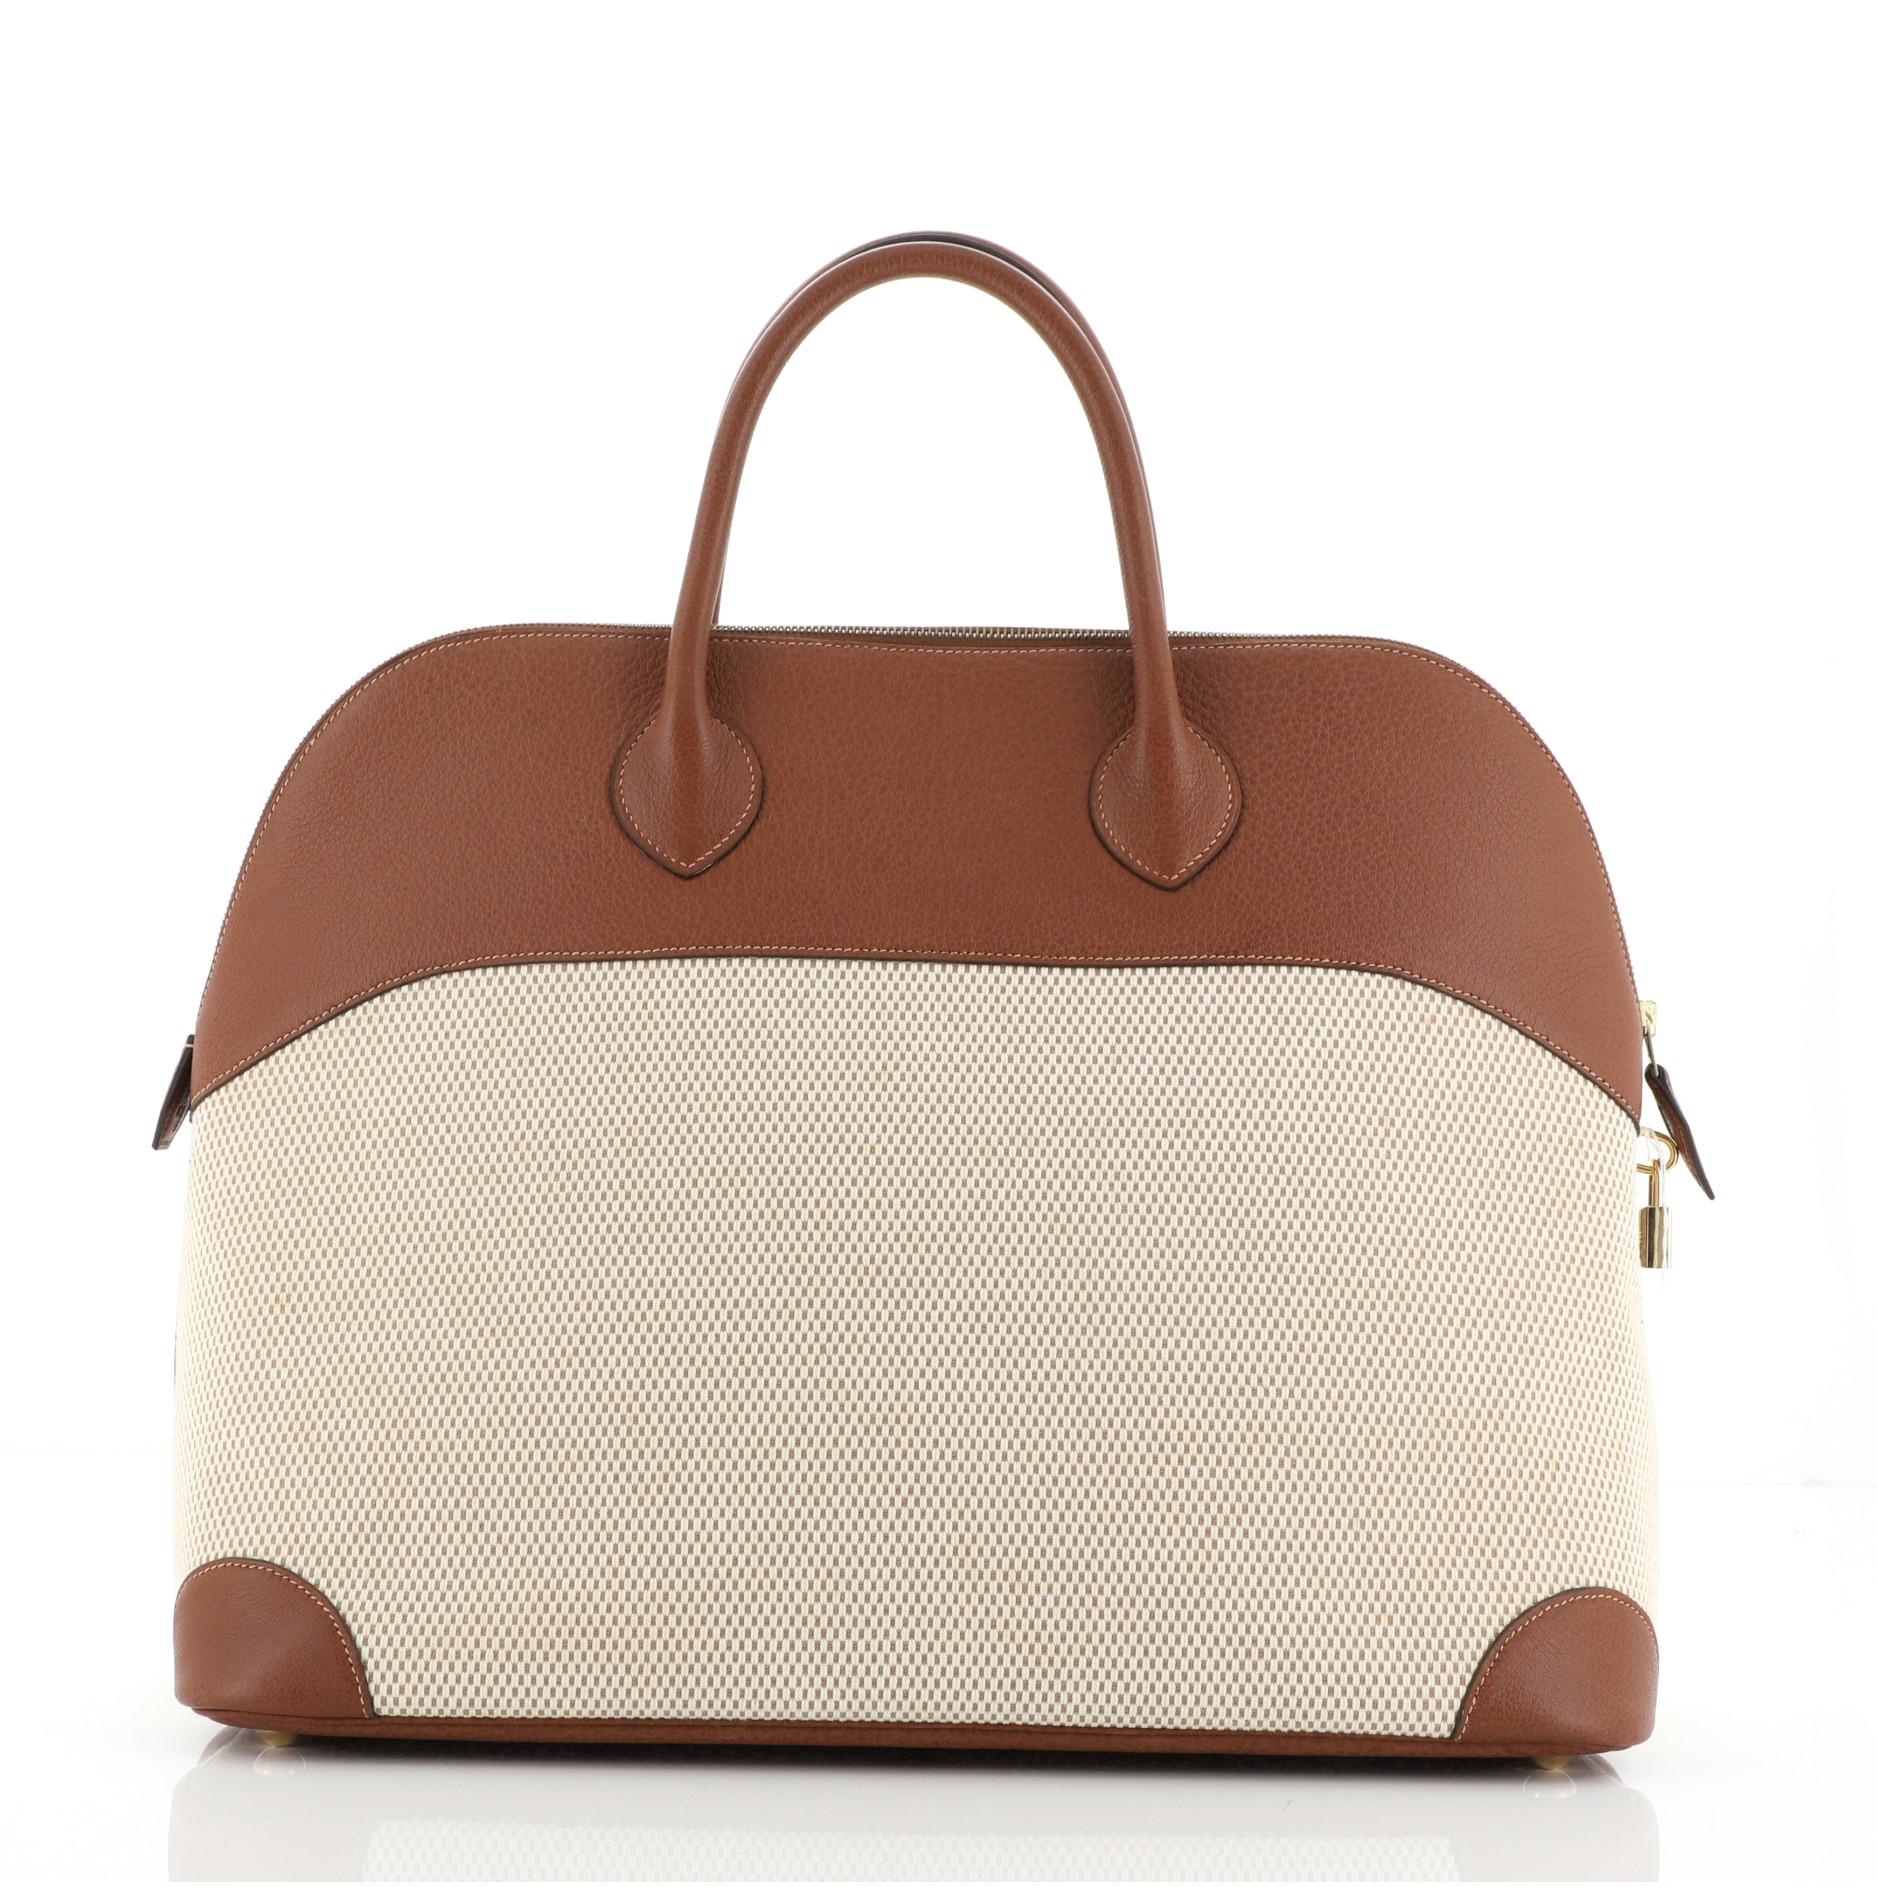 Beige Hermes Bolide Bag Canvas with Leather 45